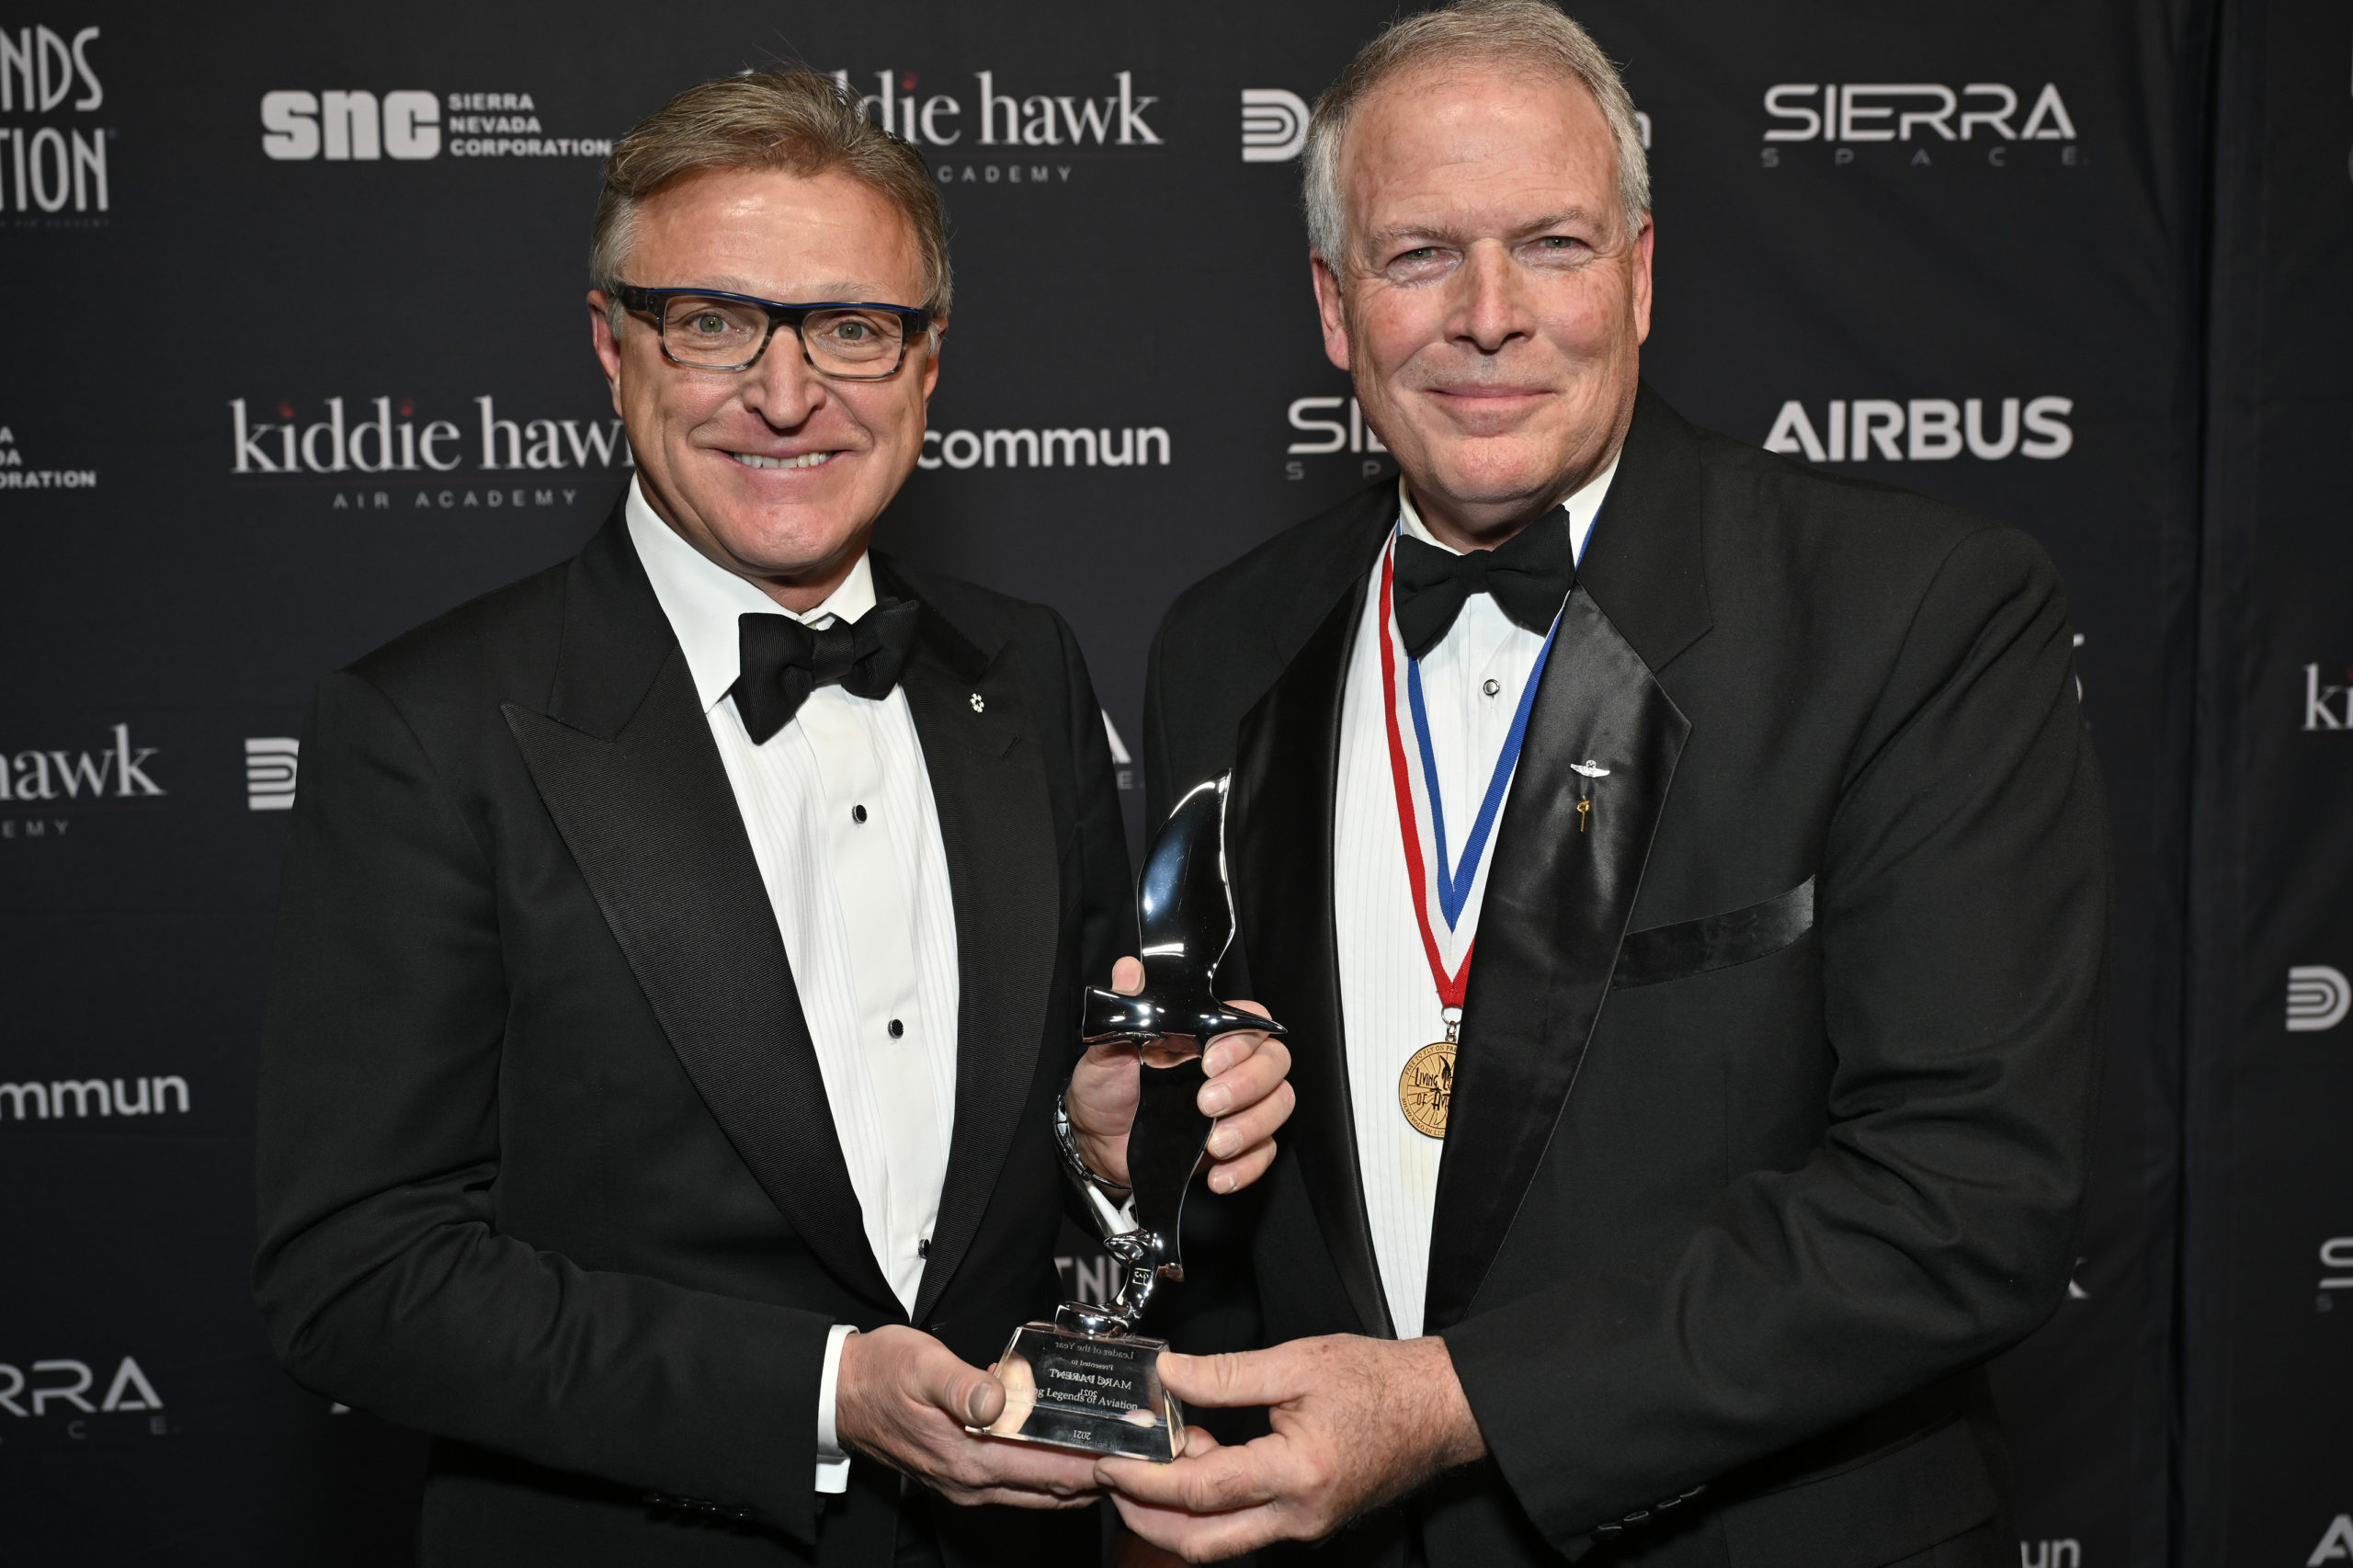 Marc Parent (left), is presented with the award by Pete Bunce, President and CEO of the General Aviation Manufacturer’s Association (GAMA). Photo: 2022 Living Legends of Aviation